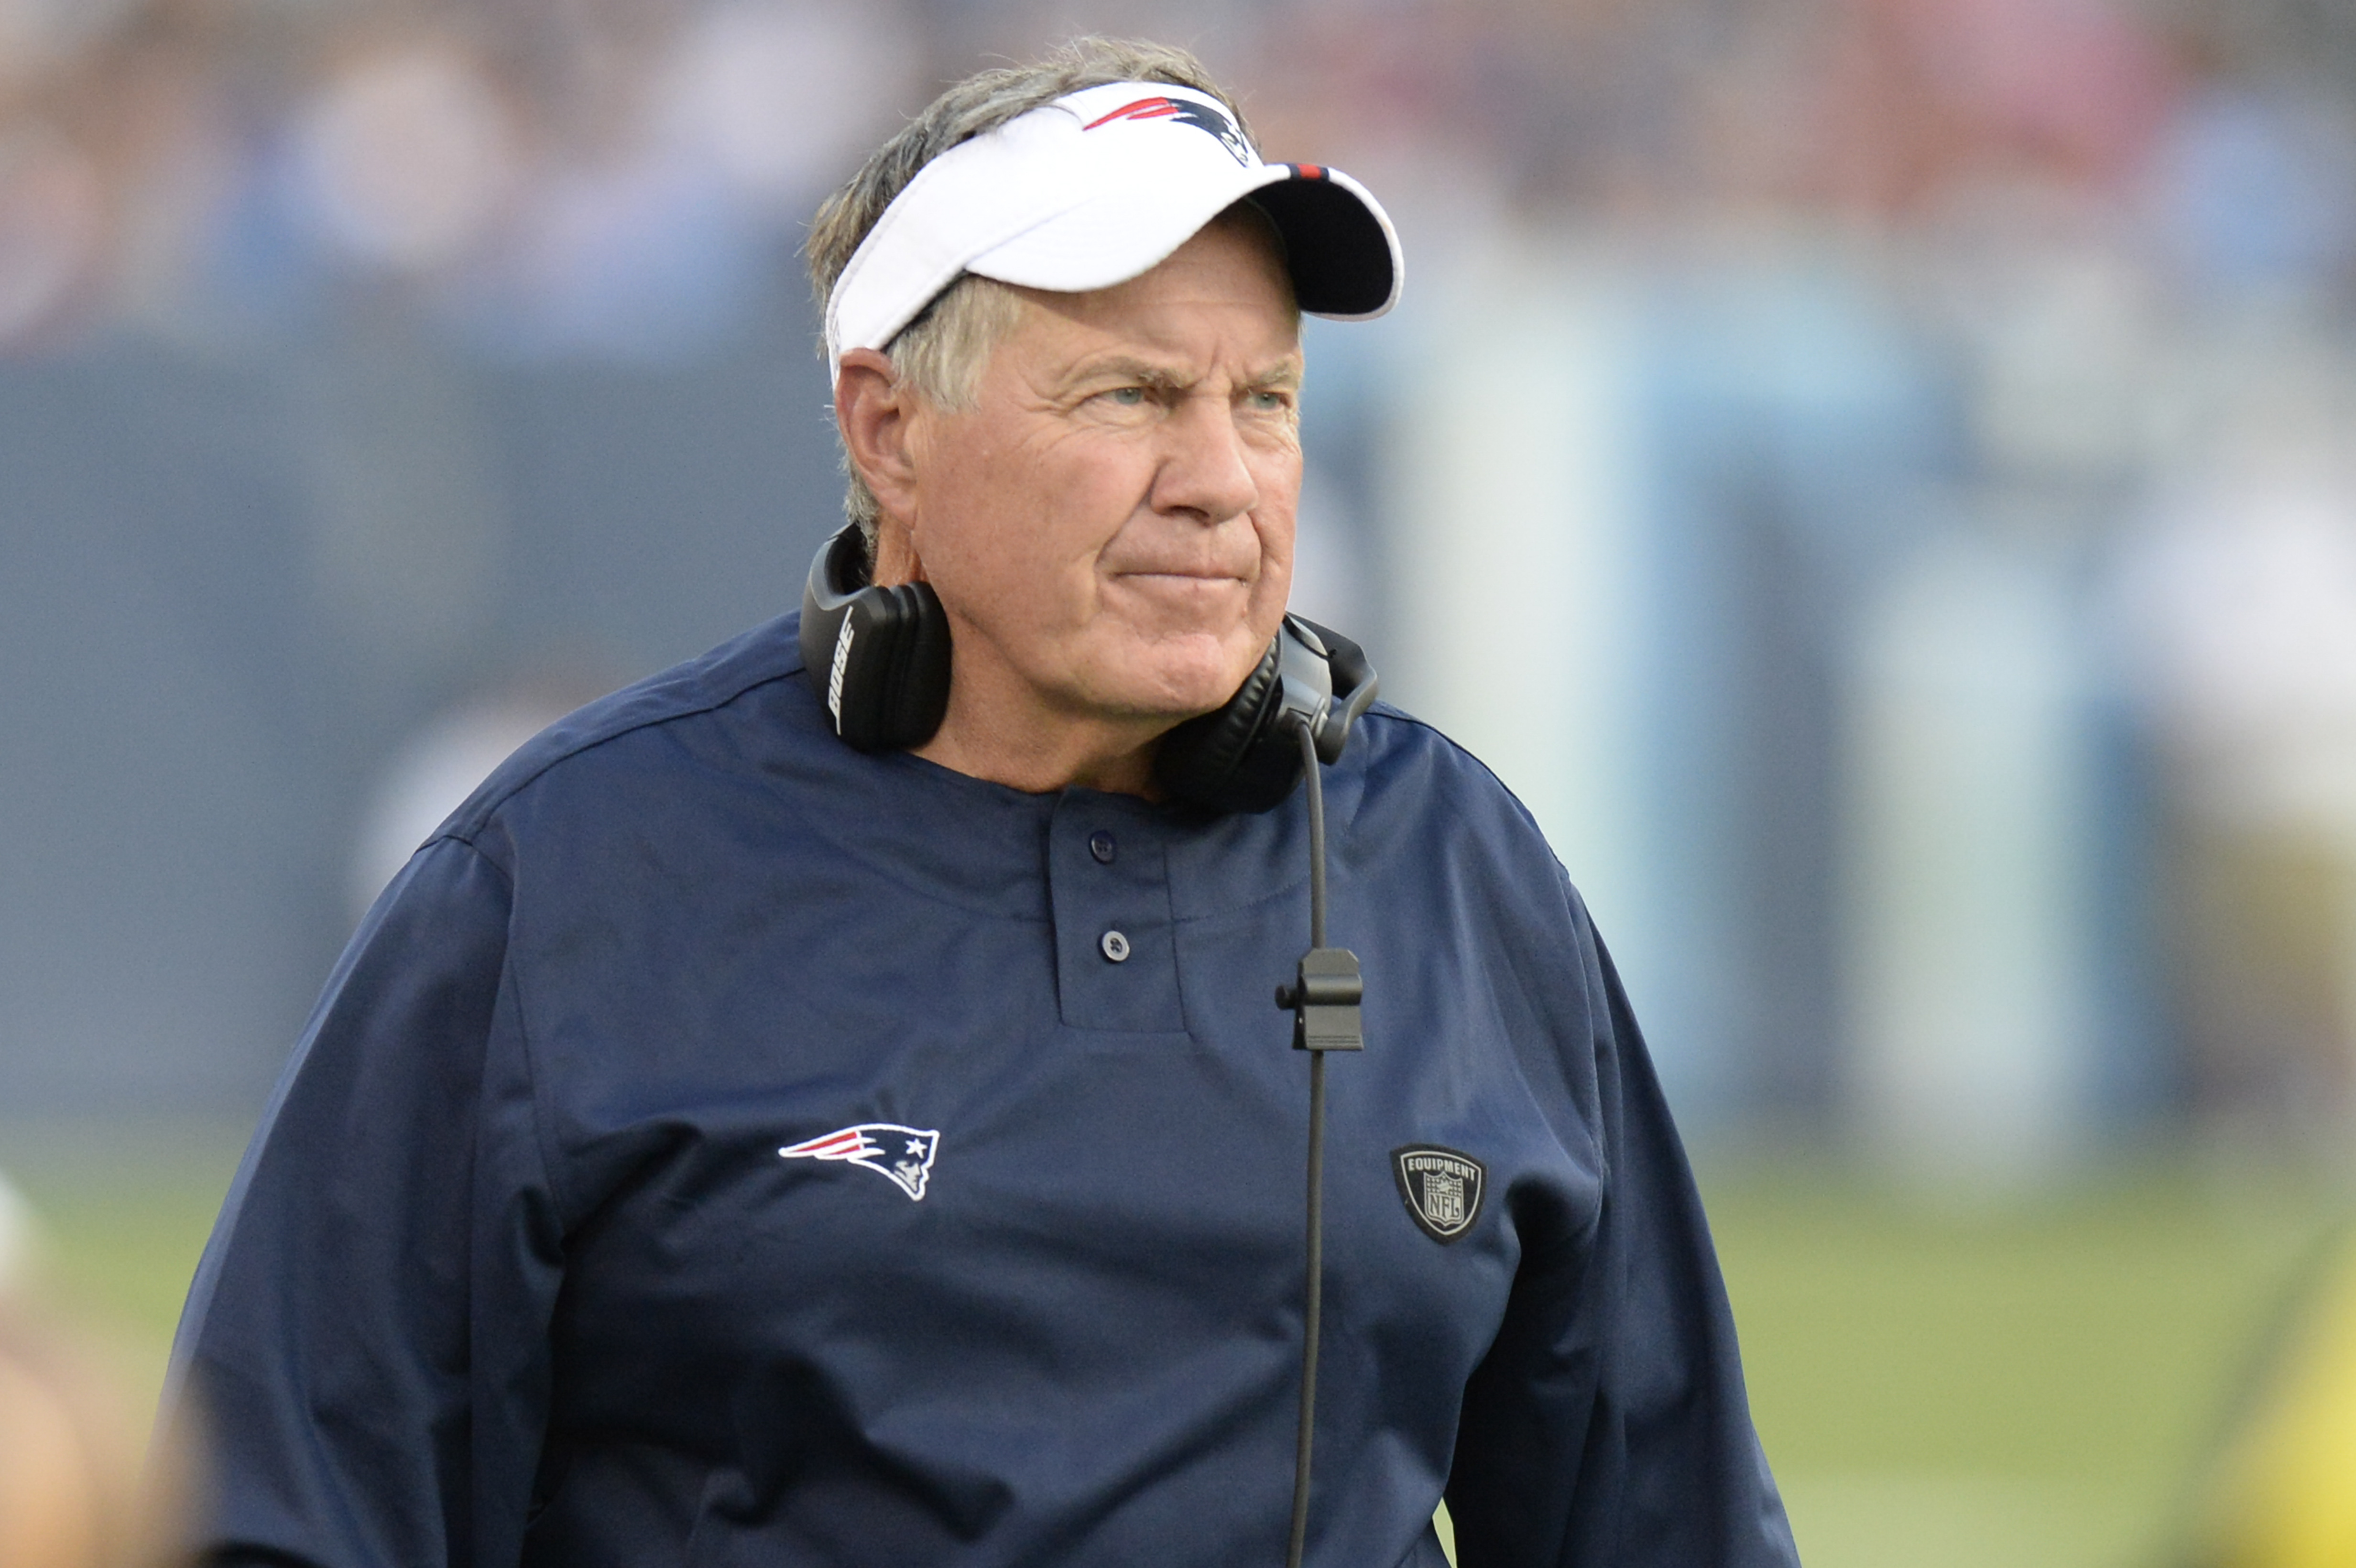 Pigskin Poll: Who is the greatest NFL head coach of all-time?